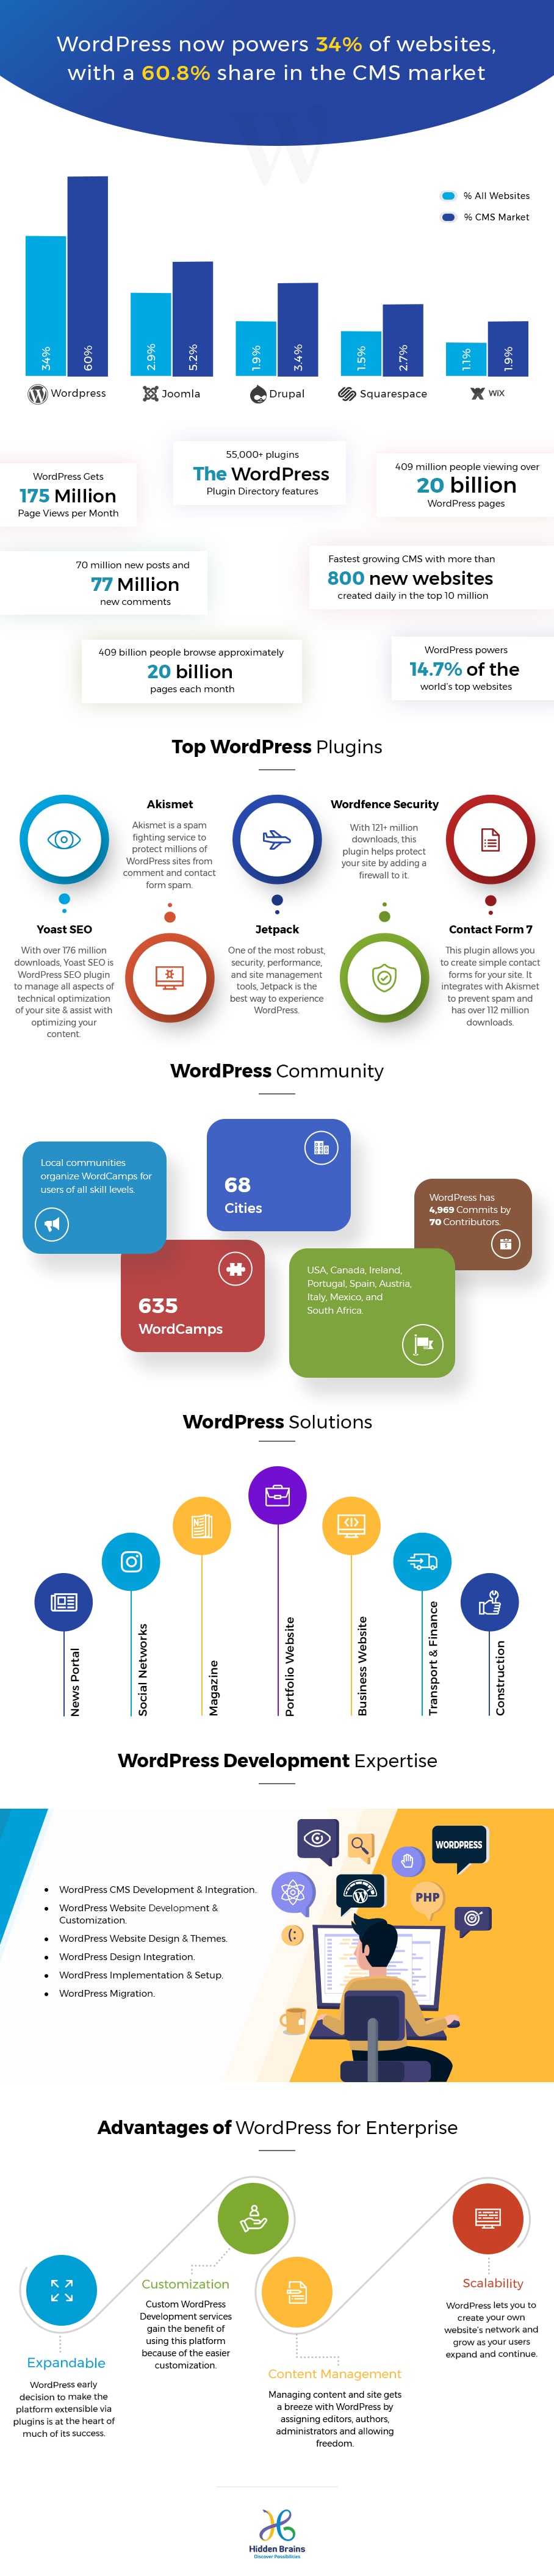 Why Use a WordPress Development for Business